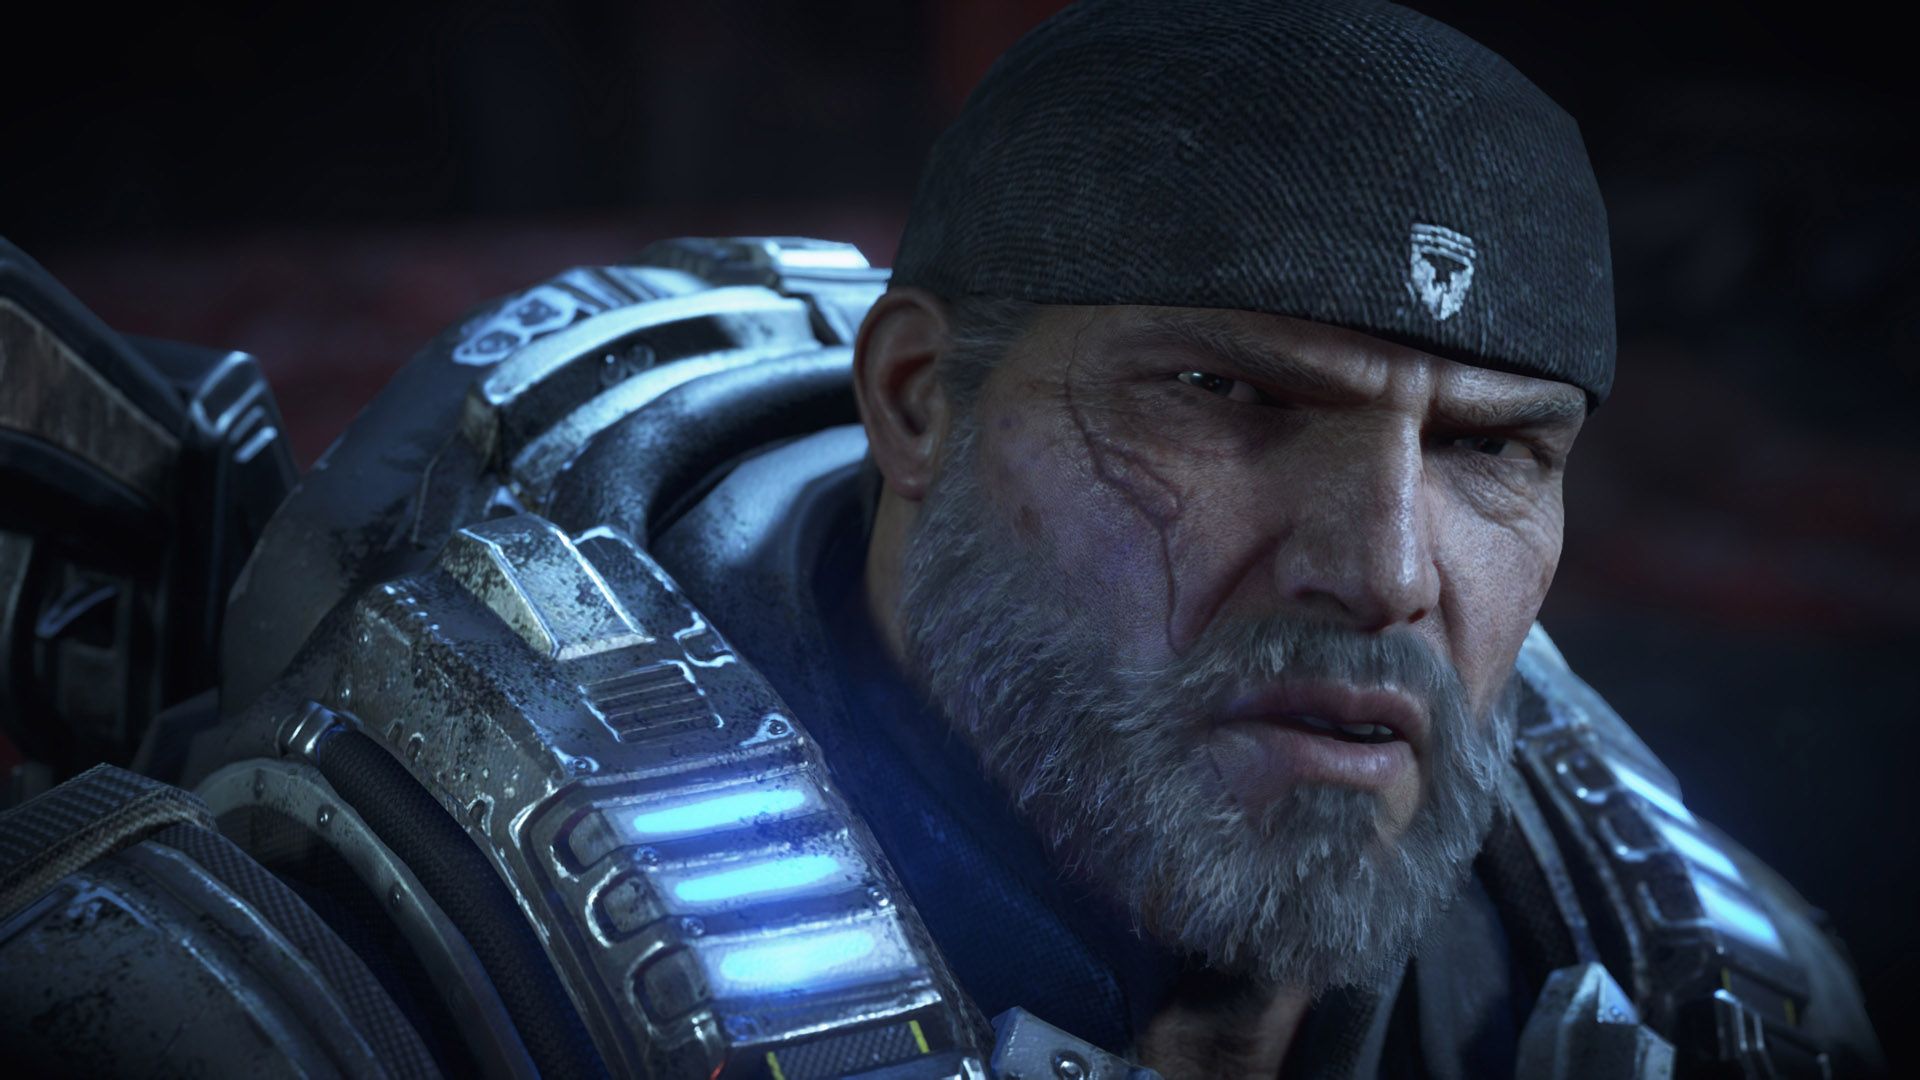 Gears of War 4 - Old Marcus in Armor